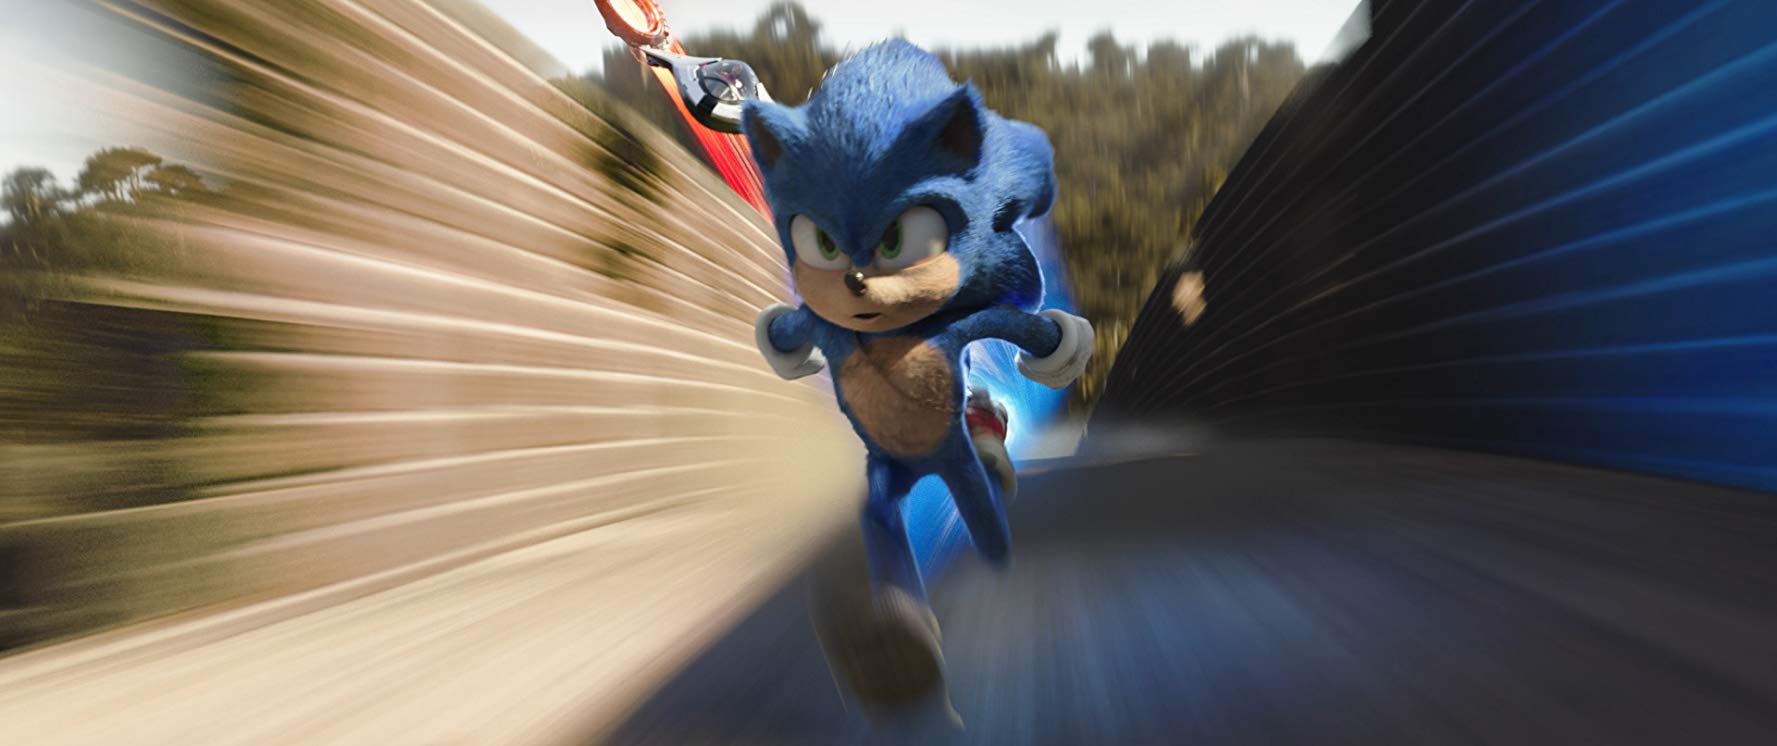 REVIEW: Sonic the Hedgehog